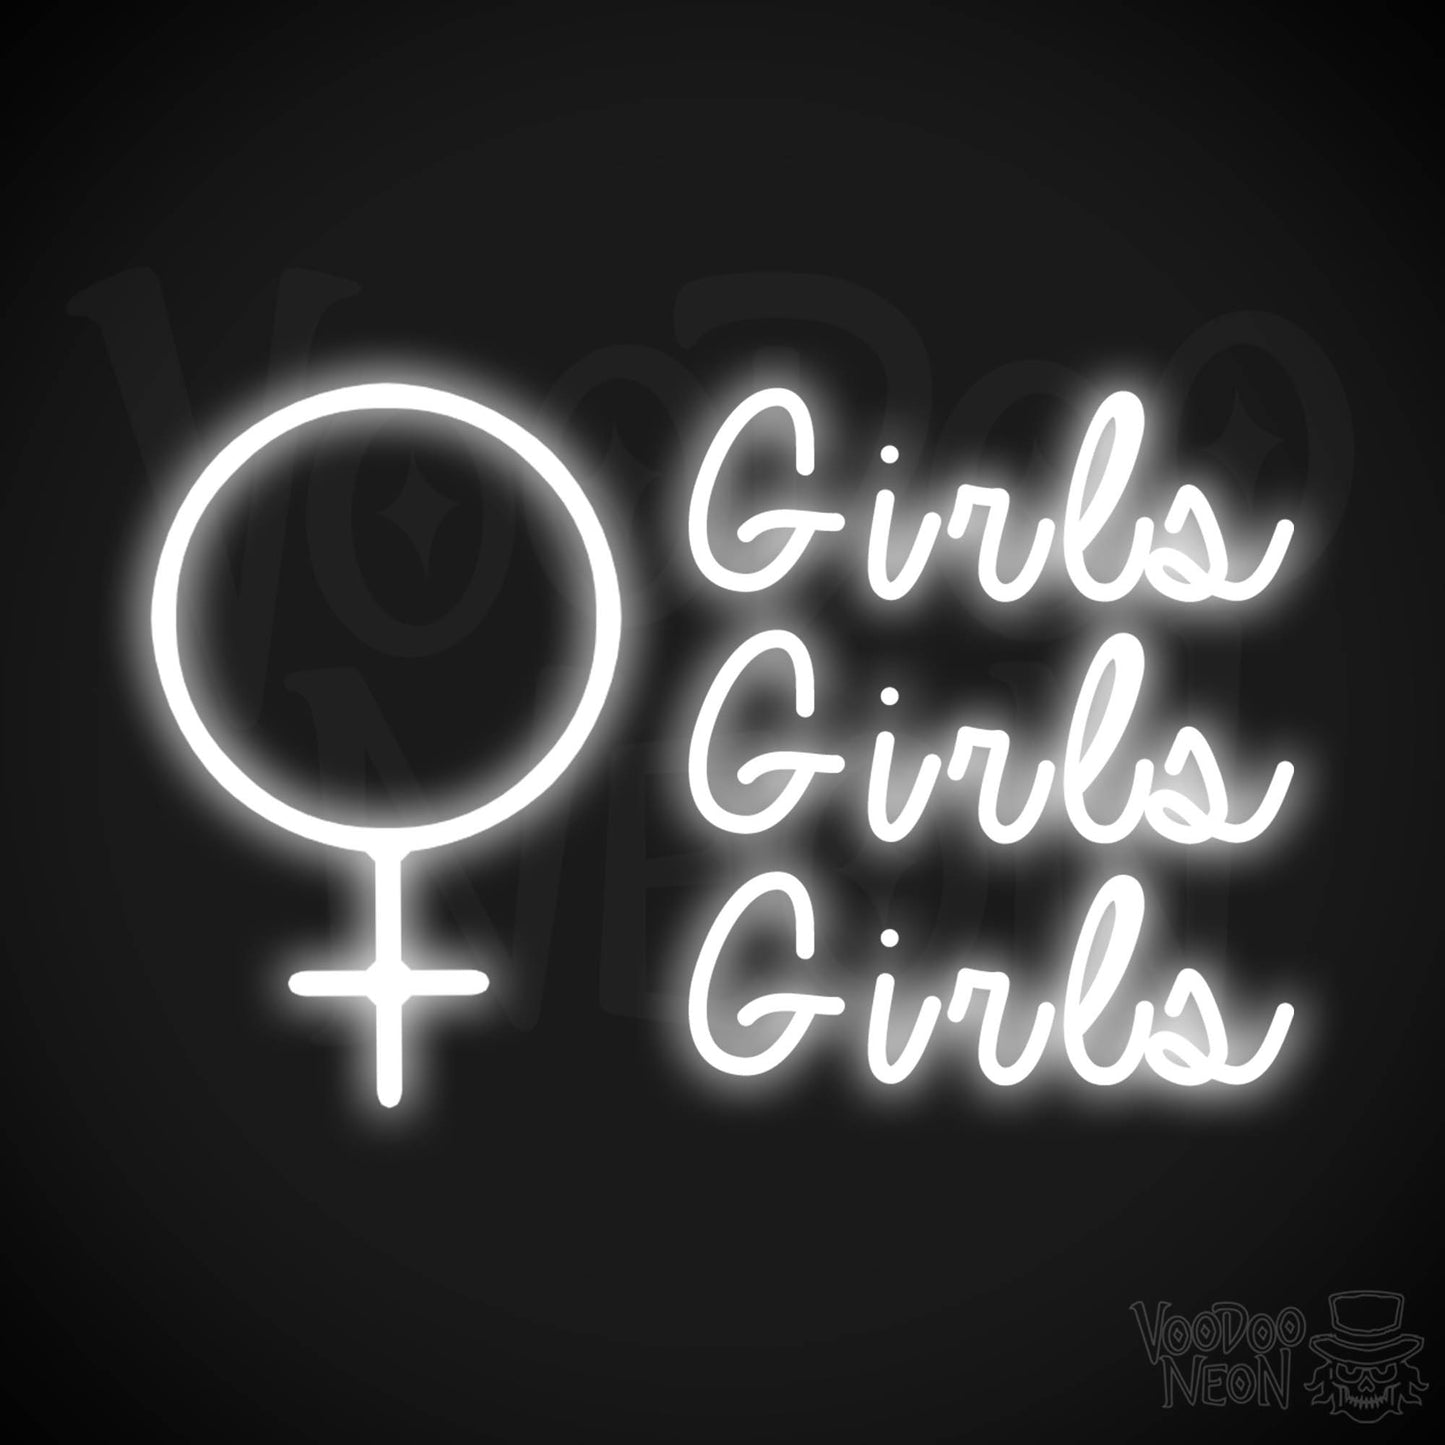 Girls Girls Girls Neon Sign - Neon Girls Girls Girls Sign - Nightclub Wall Art - Color White